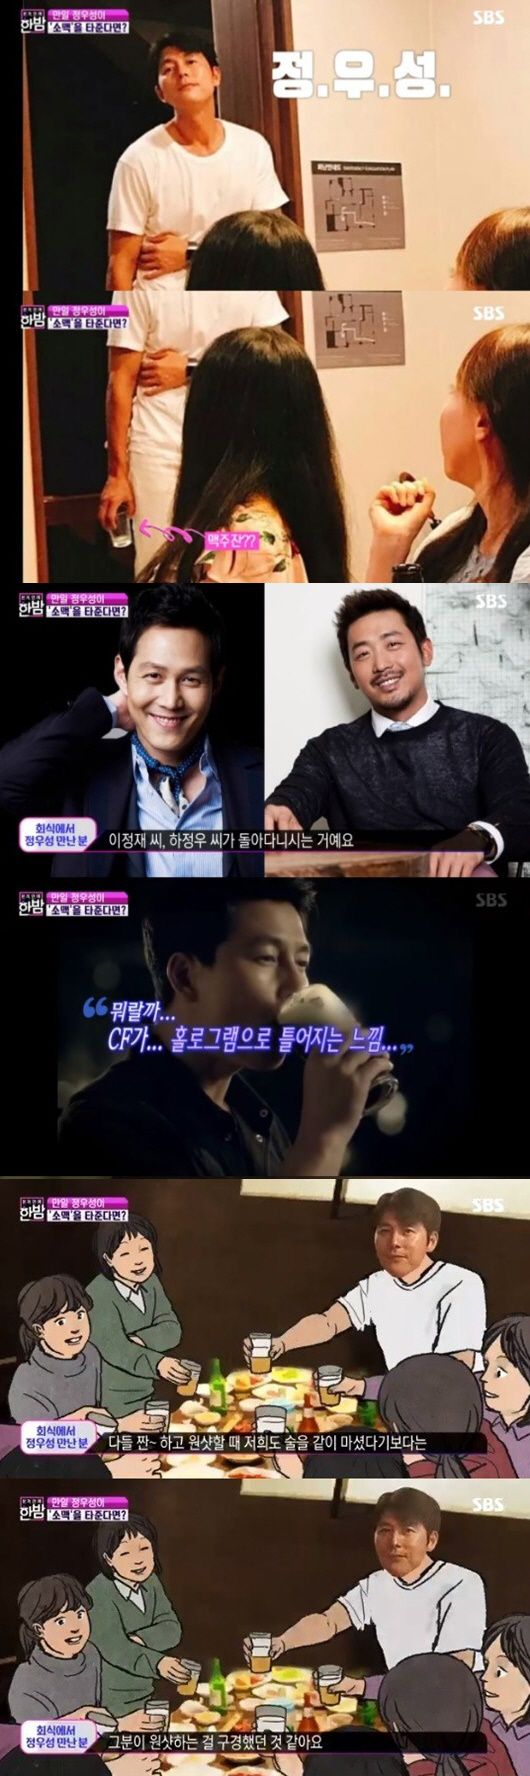 On SBSs Full Entertainment Midnight, which aired on the 29th, Jung Woo-sung recently appeared at the Alcoholic drink site and released the witness story A and Interview, which said he drank Bear and Joju.Mr. A recently collected a topic by uploading a photo of Alcoholic drink with Jung Woo-sung through Instagram.A said, There was an Alcoholic drink, and Lee Jung-jae, Mr. Ha Jung-woo, walked around the front room.So I was looking out, hoping that Jung Woo-sung might pass, and then I was passing by, and we were unwittingly shouting, Jung Woo-sung.I think Jung Woo-sung gave me a unique look on his face, he said.We (Jung Woo-sung) drank beer and Soju together and toasted and drank together, he said. I watched him when he shot one shot rather than drinking together.It felt like CF was hologramed. It was just good, not in my ears, no voice or anything. long bead